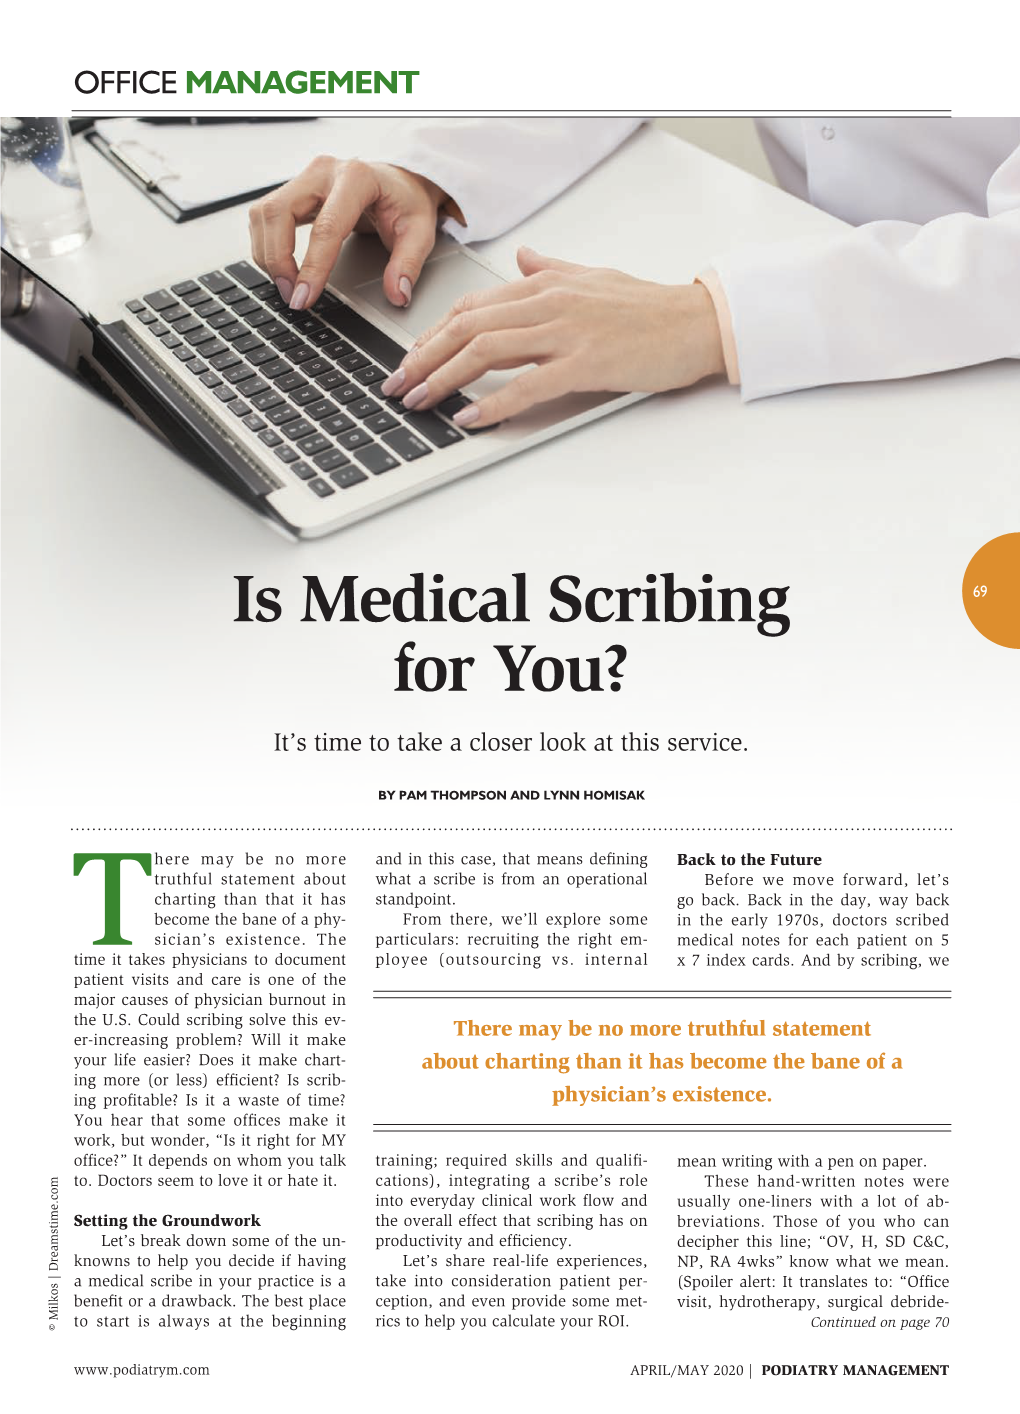 Is Medical Scribing for You?